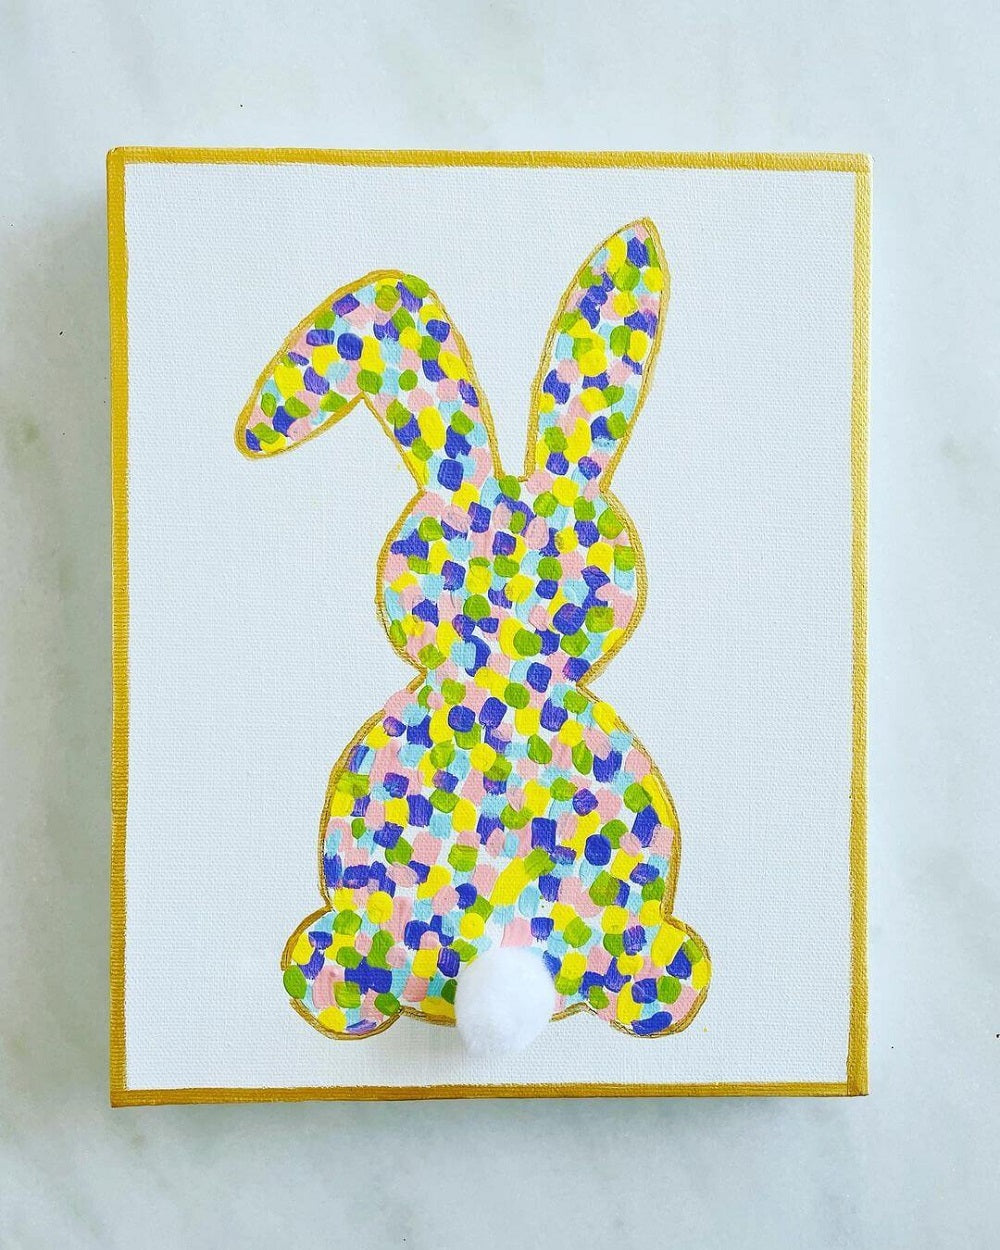 A bright bunny artwork painted on canvas with yellow, blue and purple colours and a gold frame with a cotton bud tail.